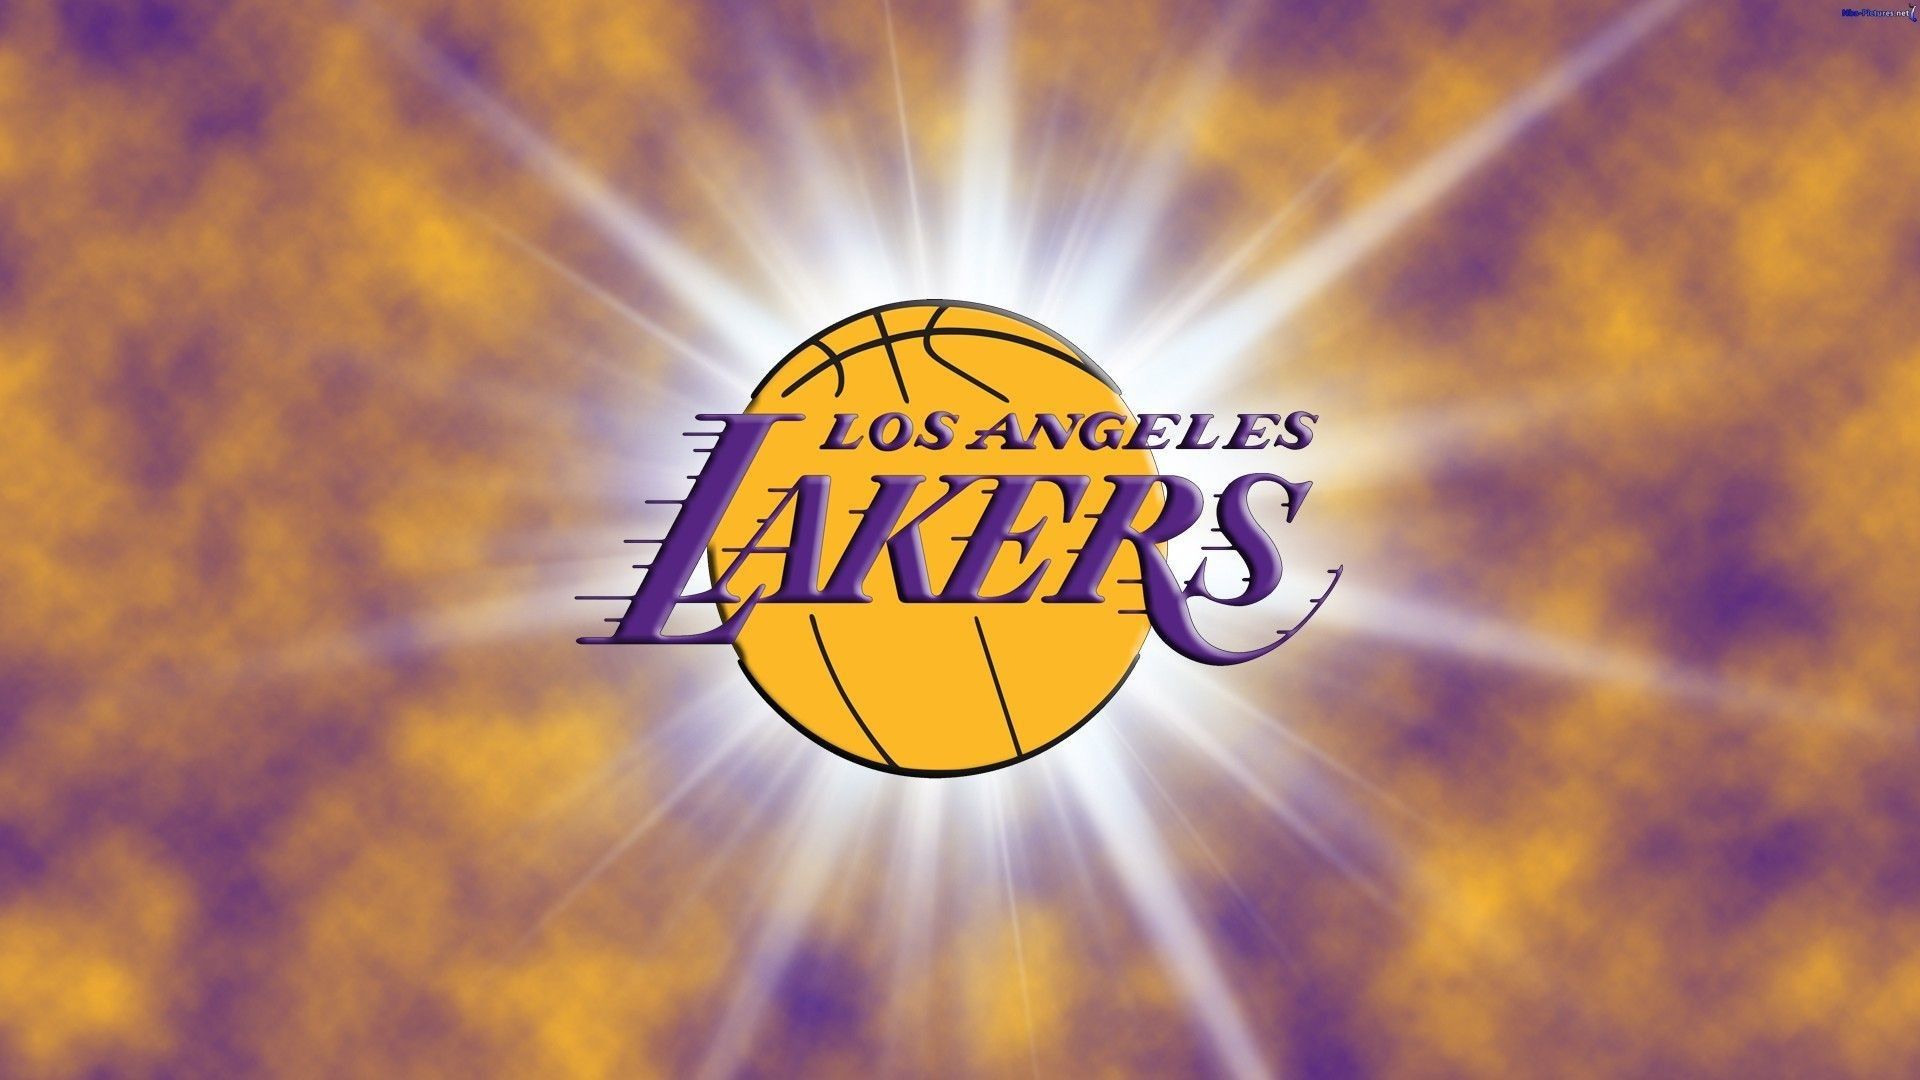 Lakers wallpaper with the logo of the team - Los Angeles Lakers